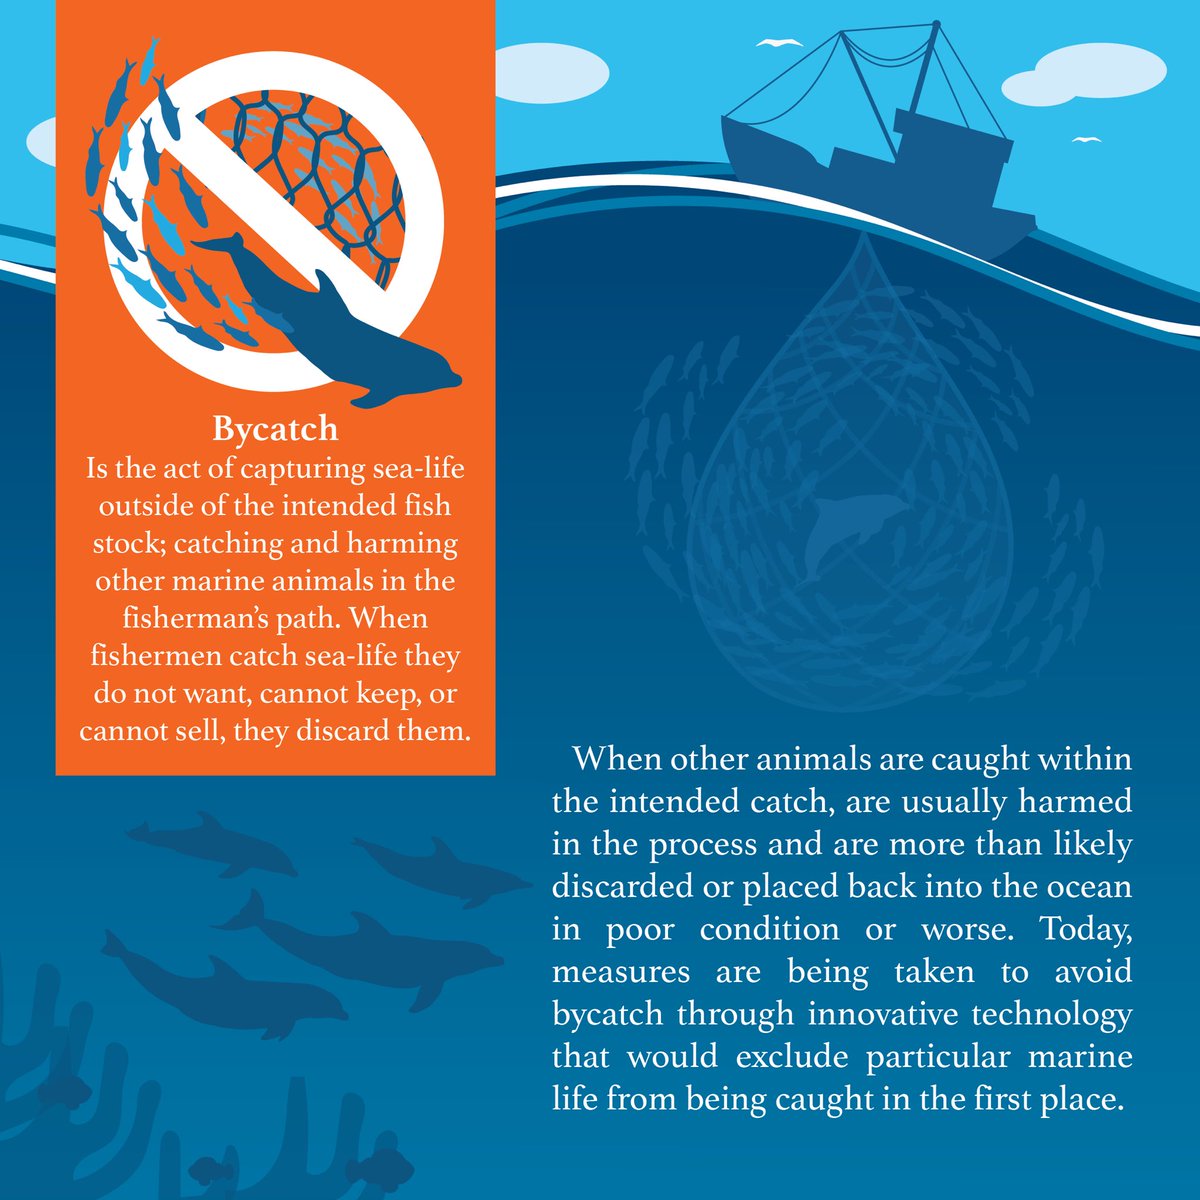 #Bycatch refers to unintentionally caught or entangled fish, mammals, turtles or sea species other than the targeted fish stocks & usually results in the death of bycatch. #IUUF #IUUFishing #fightIUU #fightIUUF #FightIUUFishing

(Graphic design by Ms. Andrea Sofia Sanchez #D7)